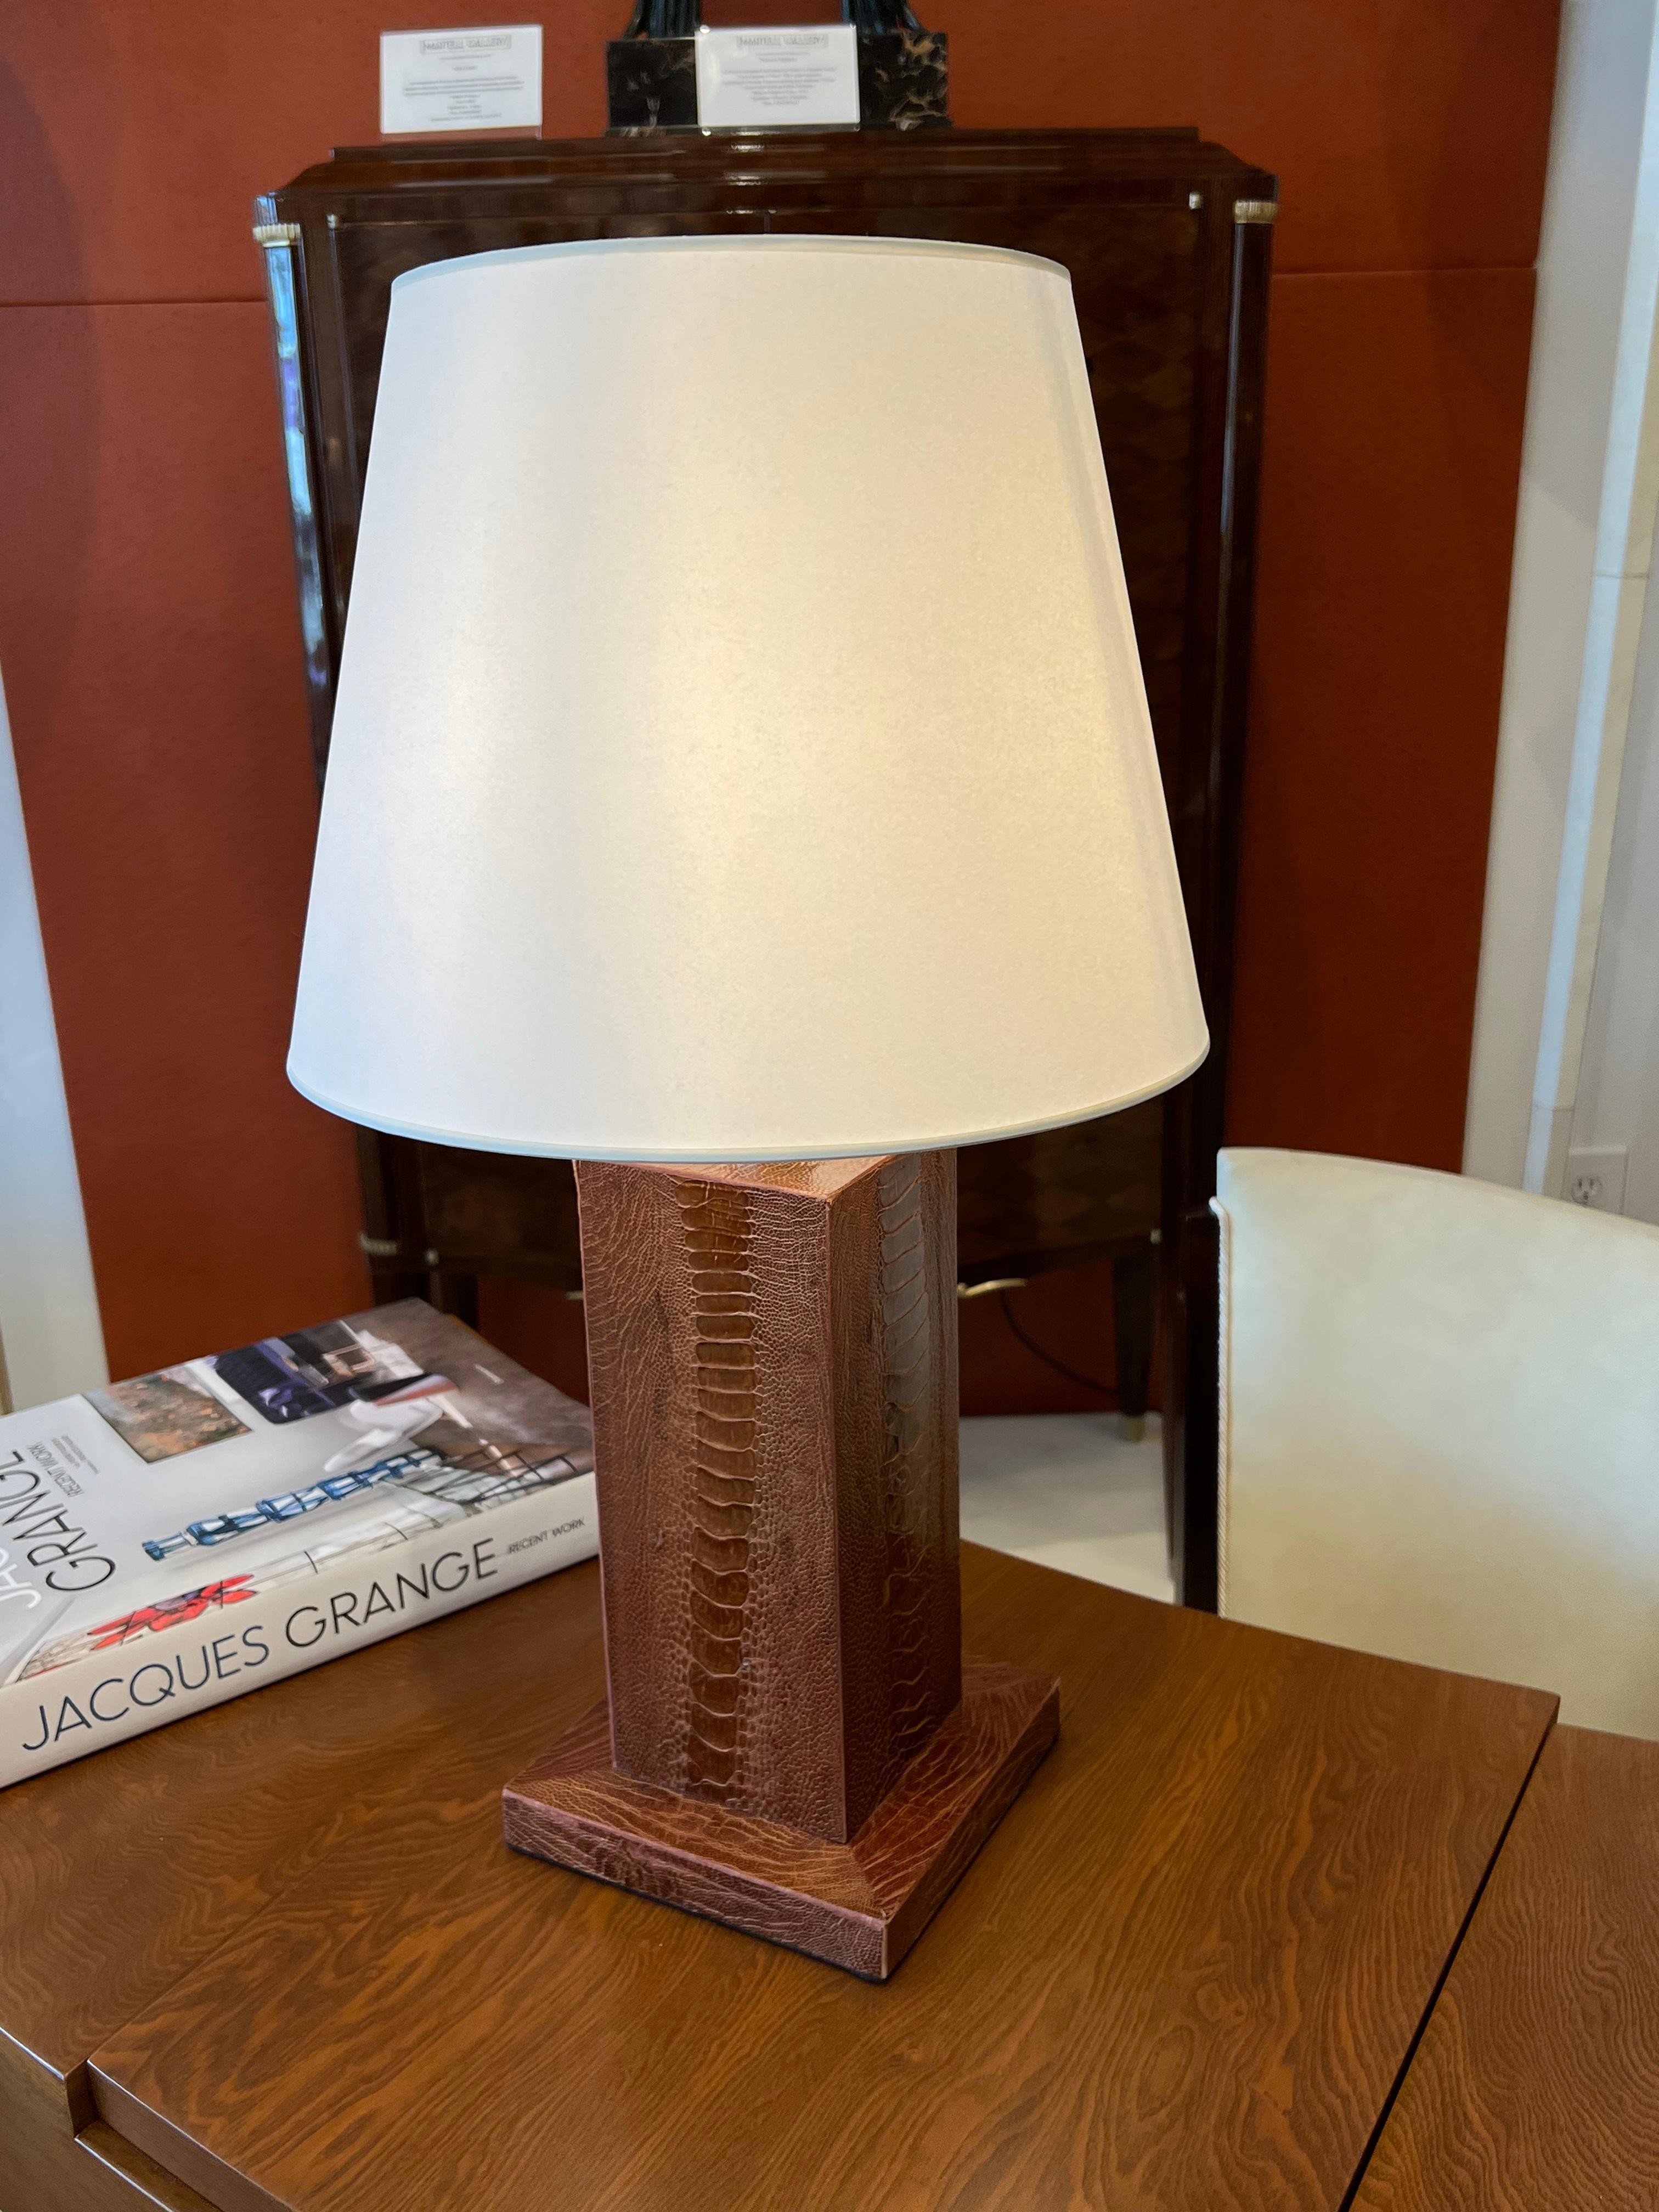 A Beautiful French table lamp in Ostrich Leather.
Made in France
Circa: 1990